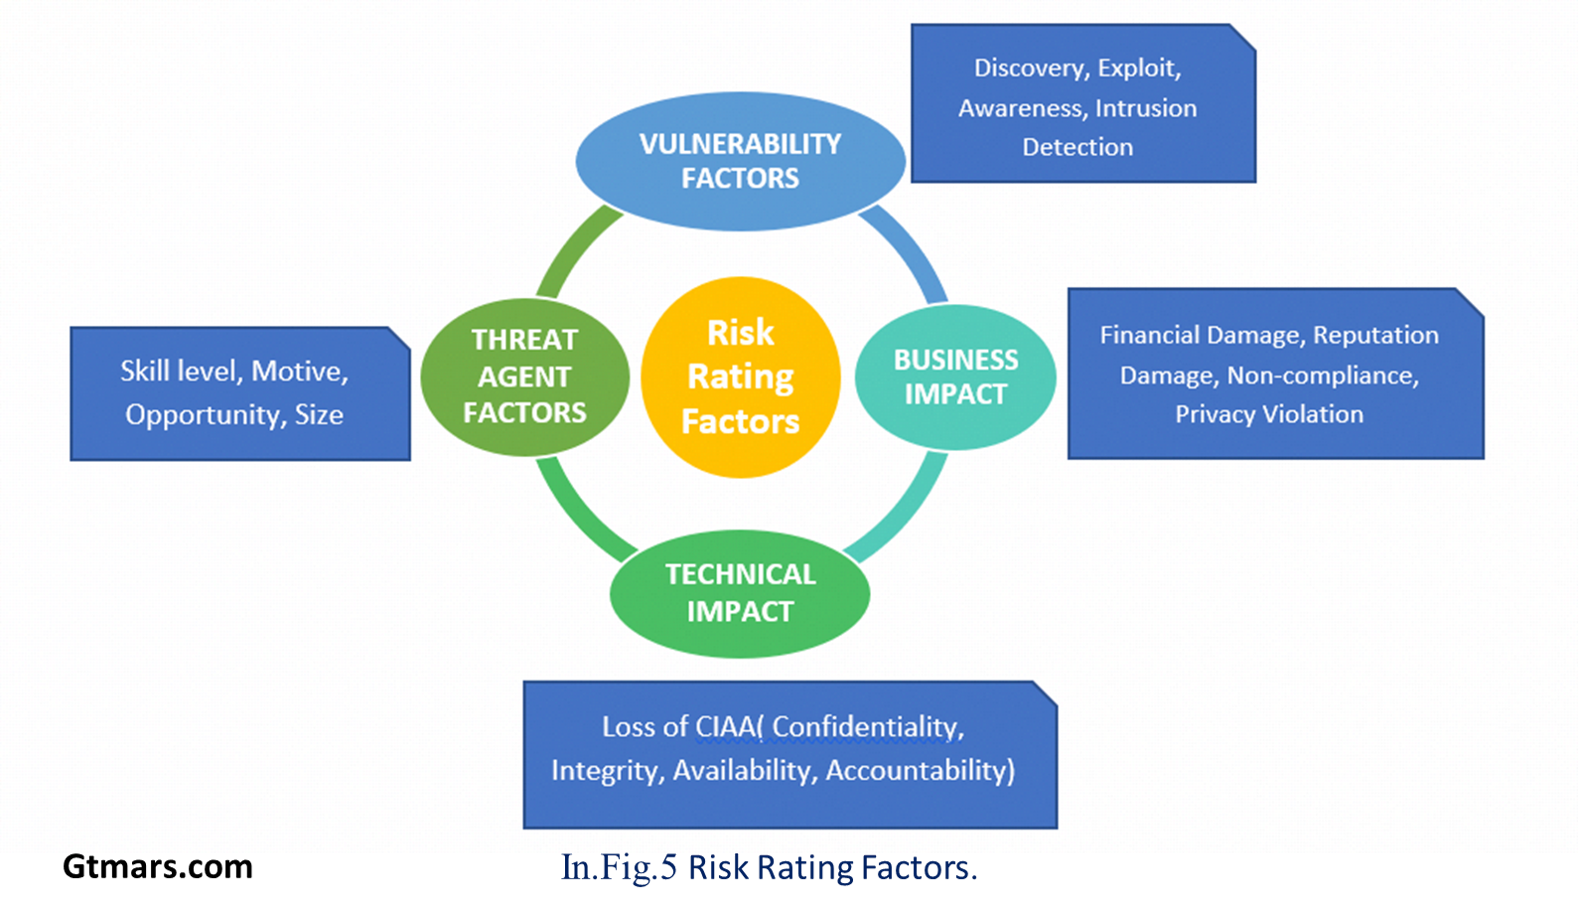 /the-ultimate-strategy-to-identify-threats-in-a-network-and-perform-risk-exposure-matrix-k5193txu feature image